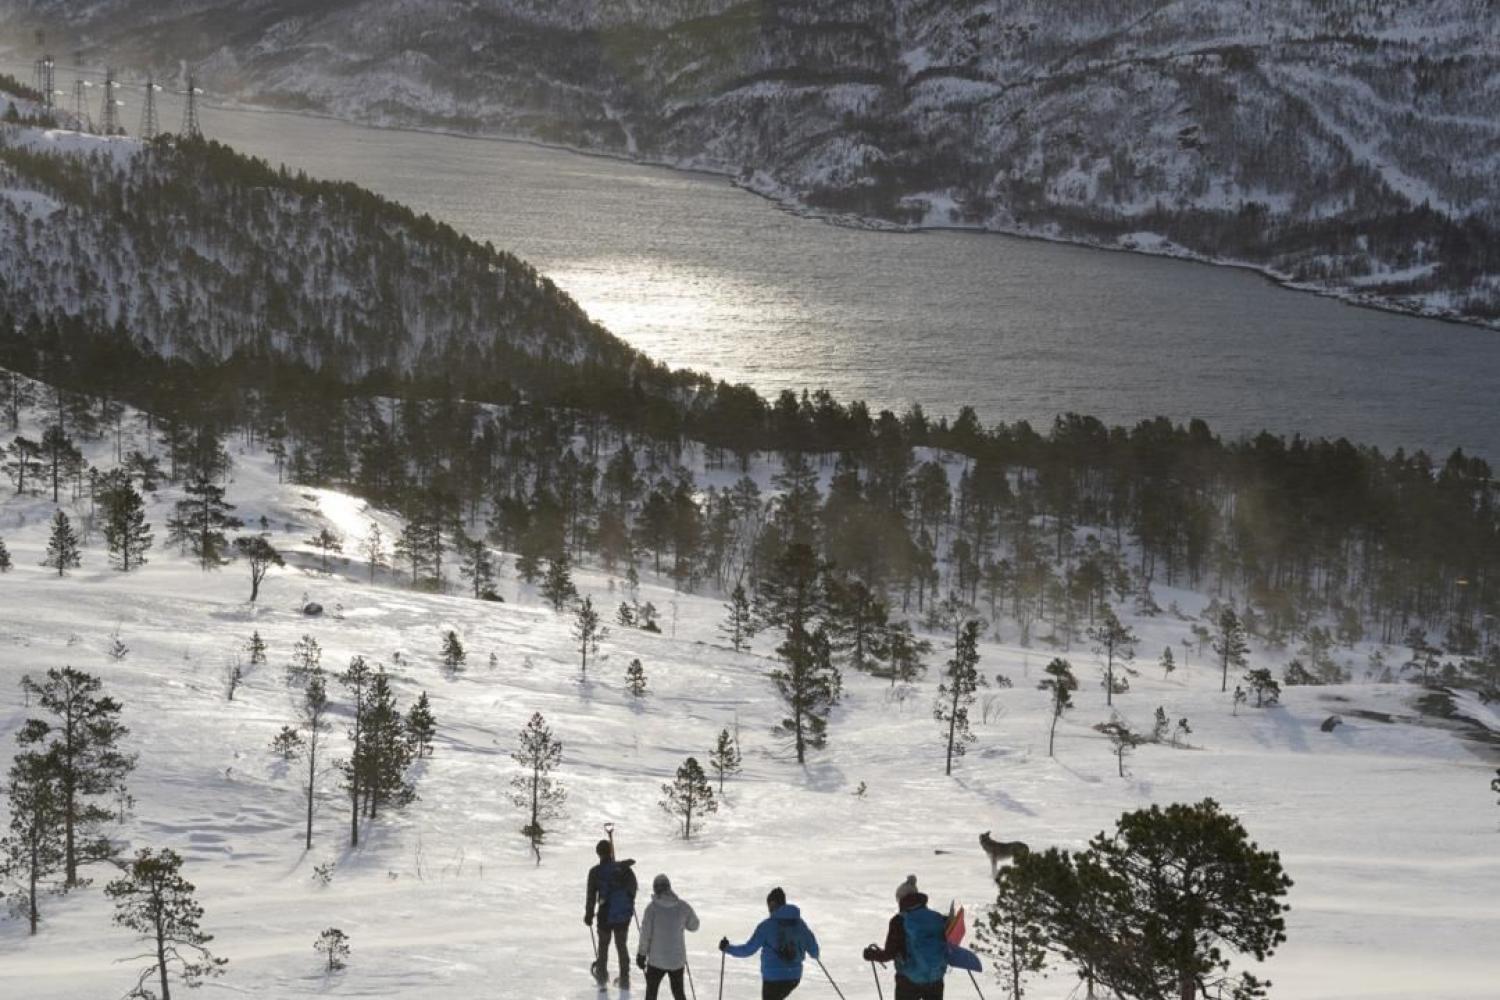 Snowshoeing along the fjord + Norwegian outdoor lunch